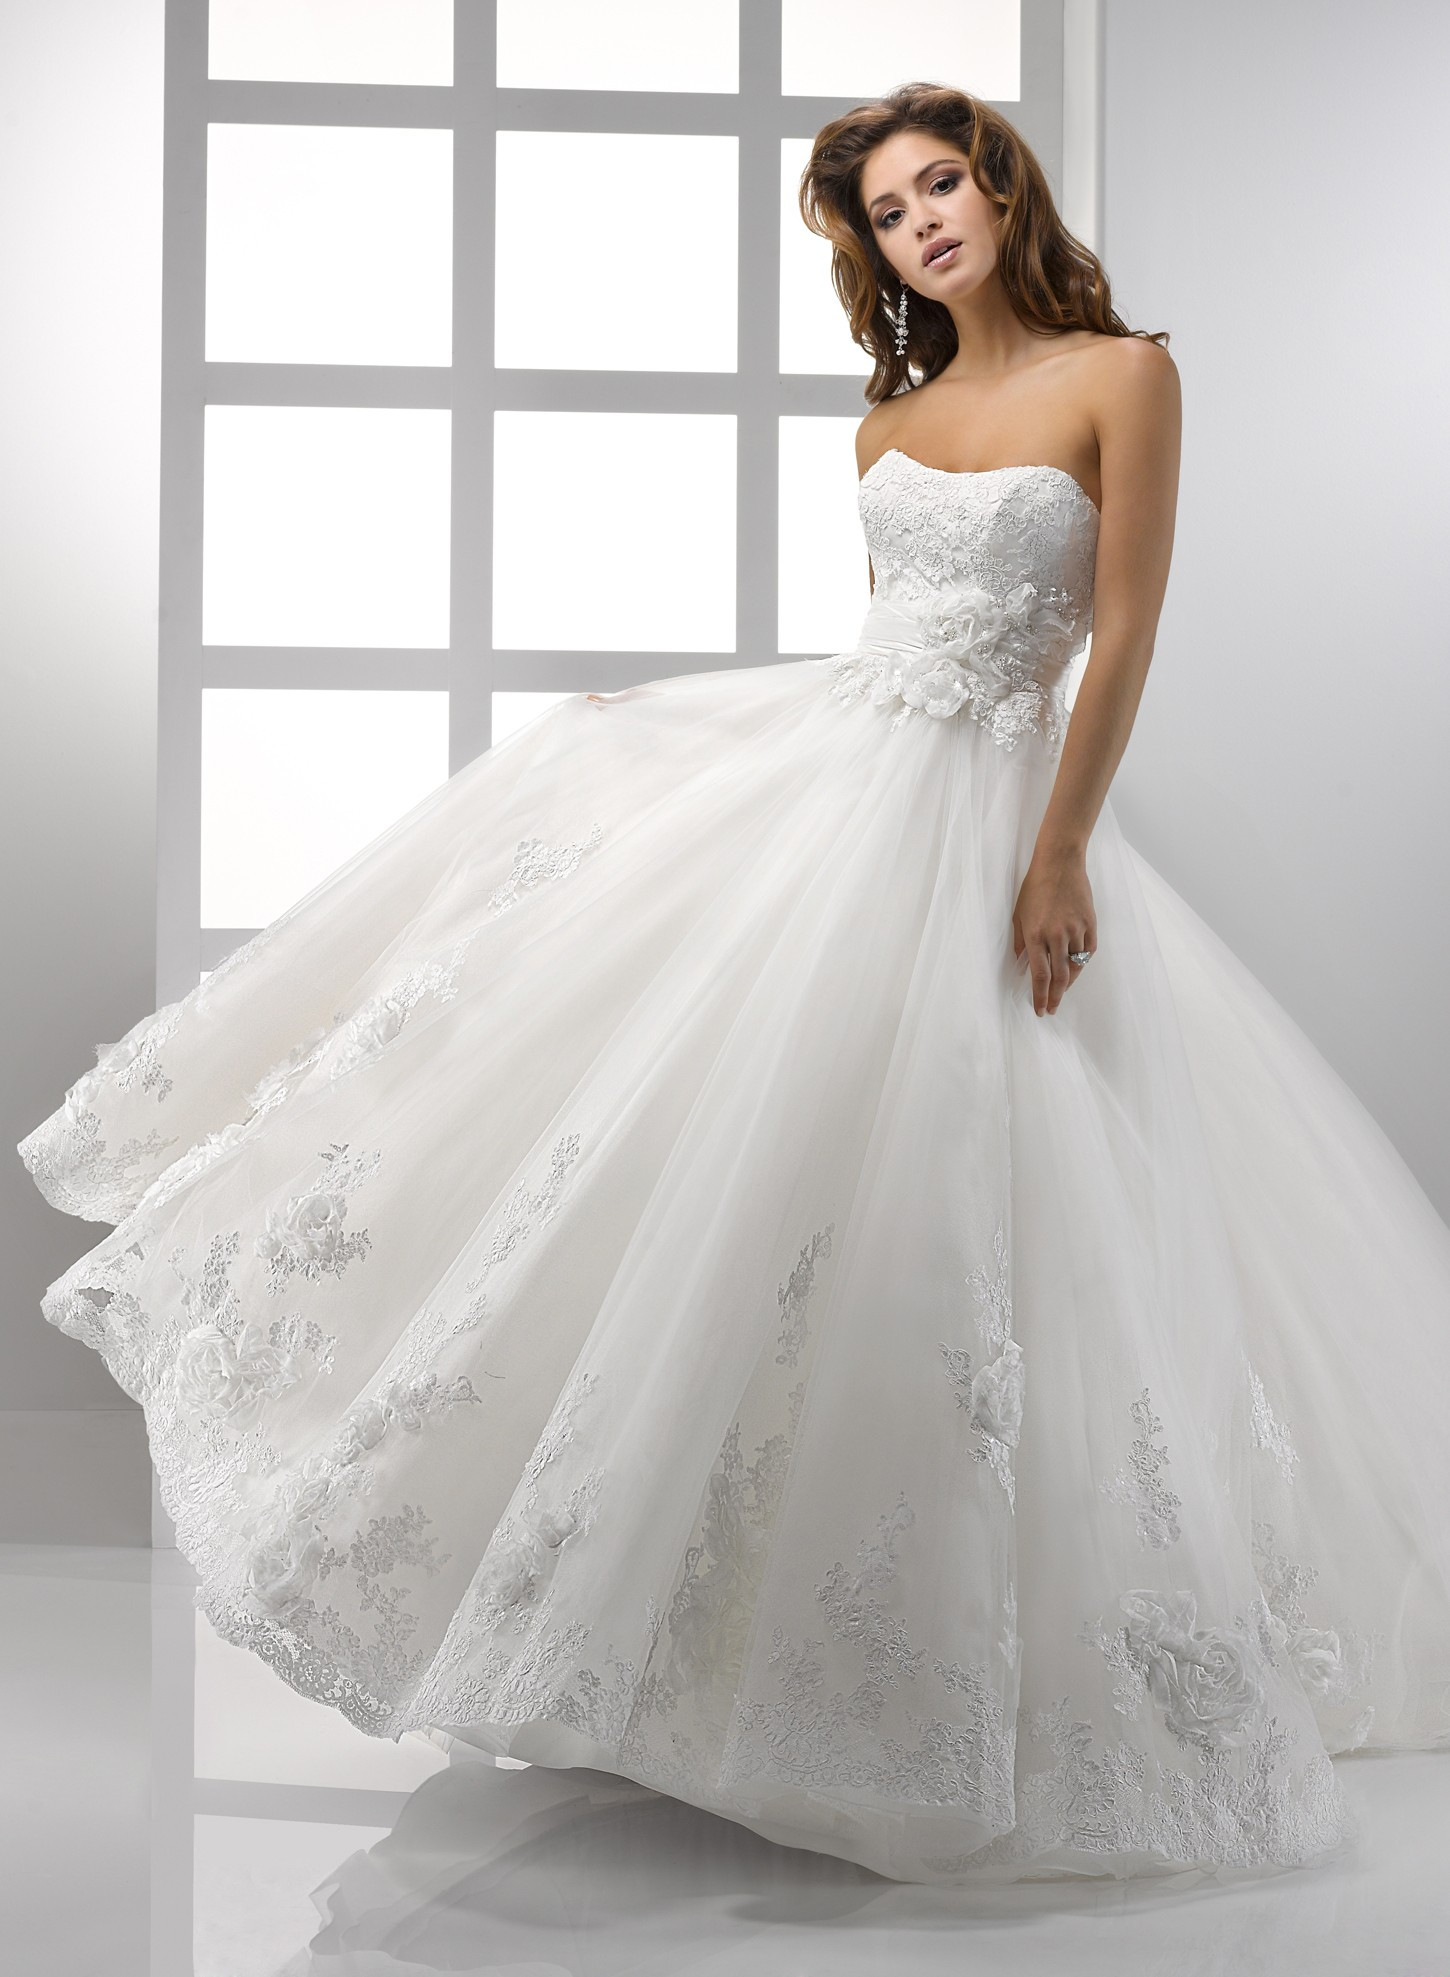 Lace Ball Gown Wedding Dresses
 Lace Ball Gown Wedding Dresses for Fabulous Bridal Look